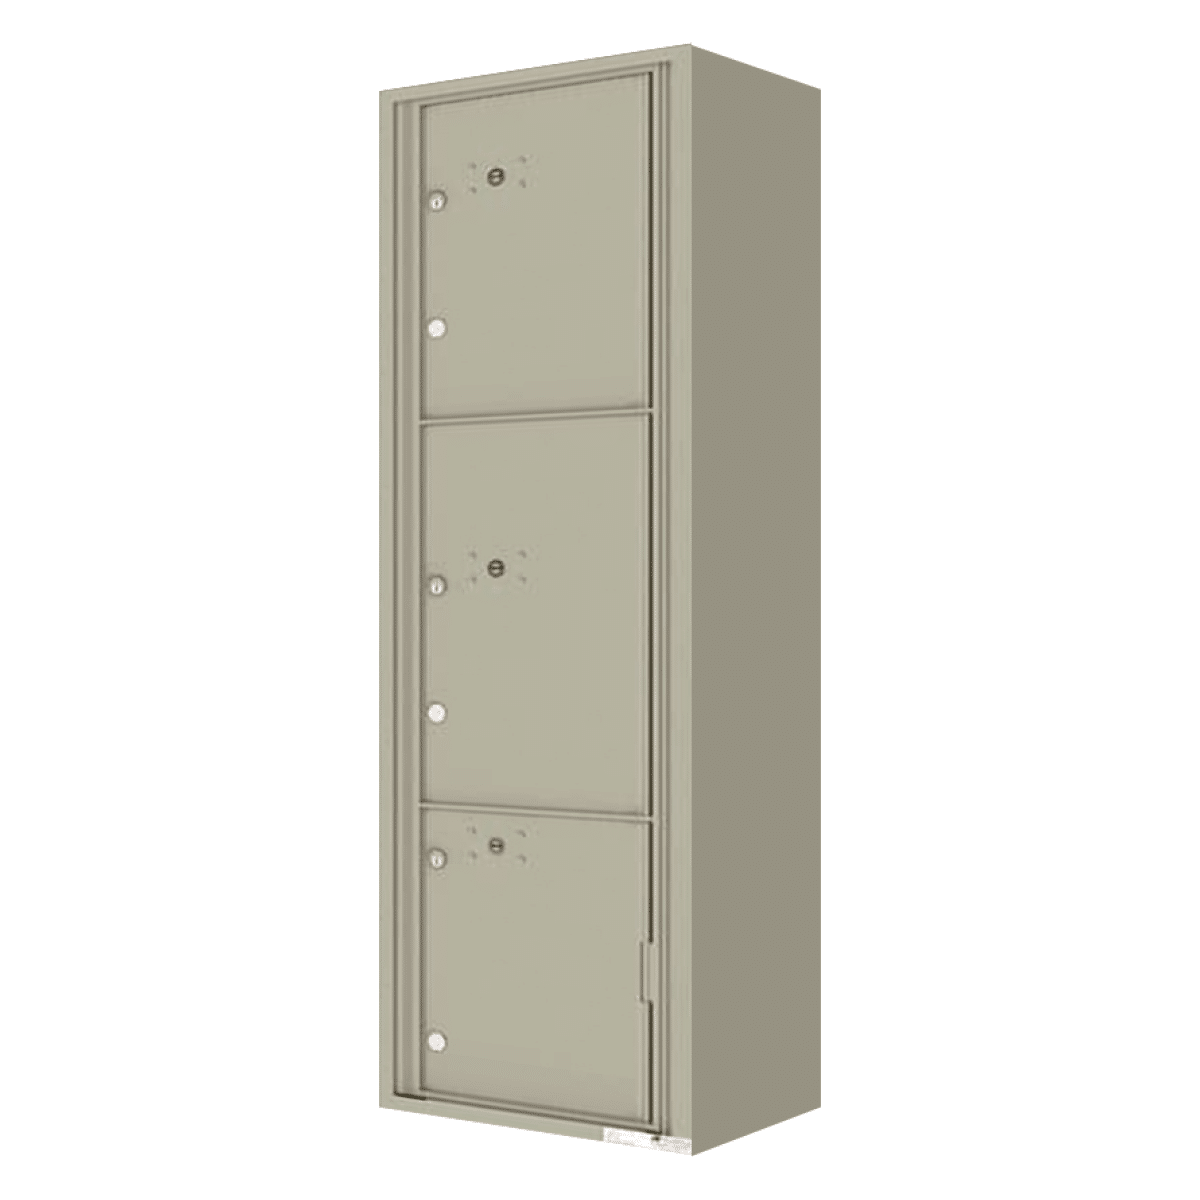 Surface Mount 4C Horizontal Mailbox – 3 Parcel Lockers – Front Loading – 4C16S-3P-SM Product Image